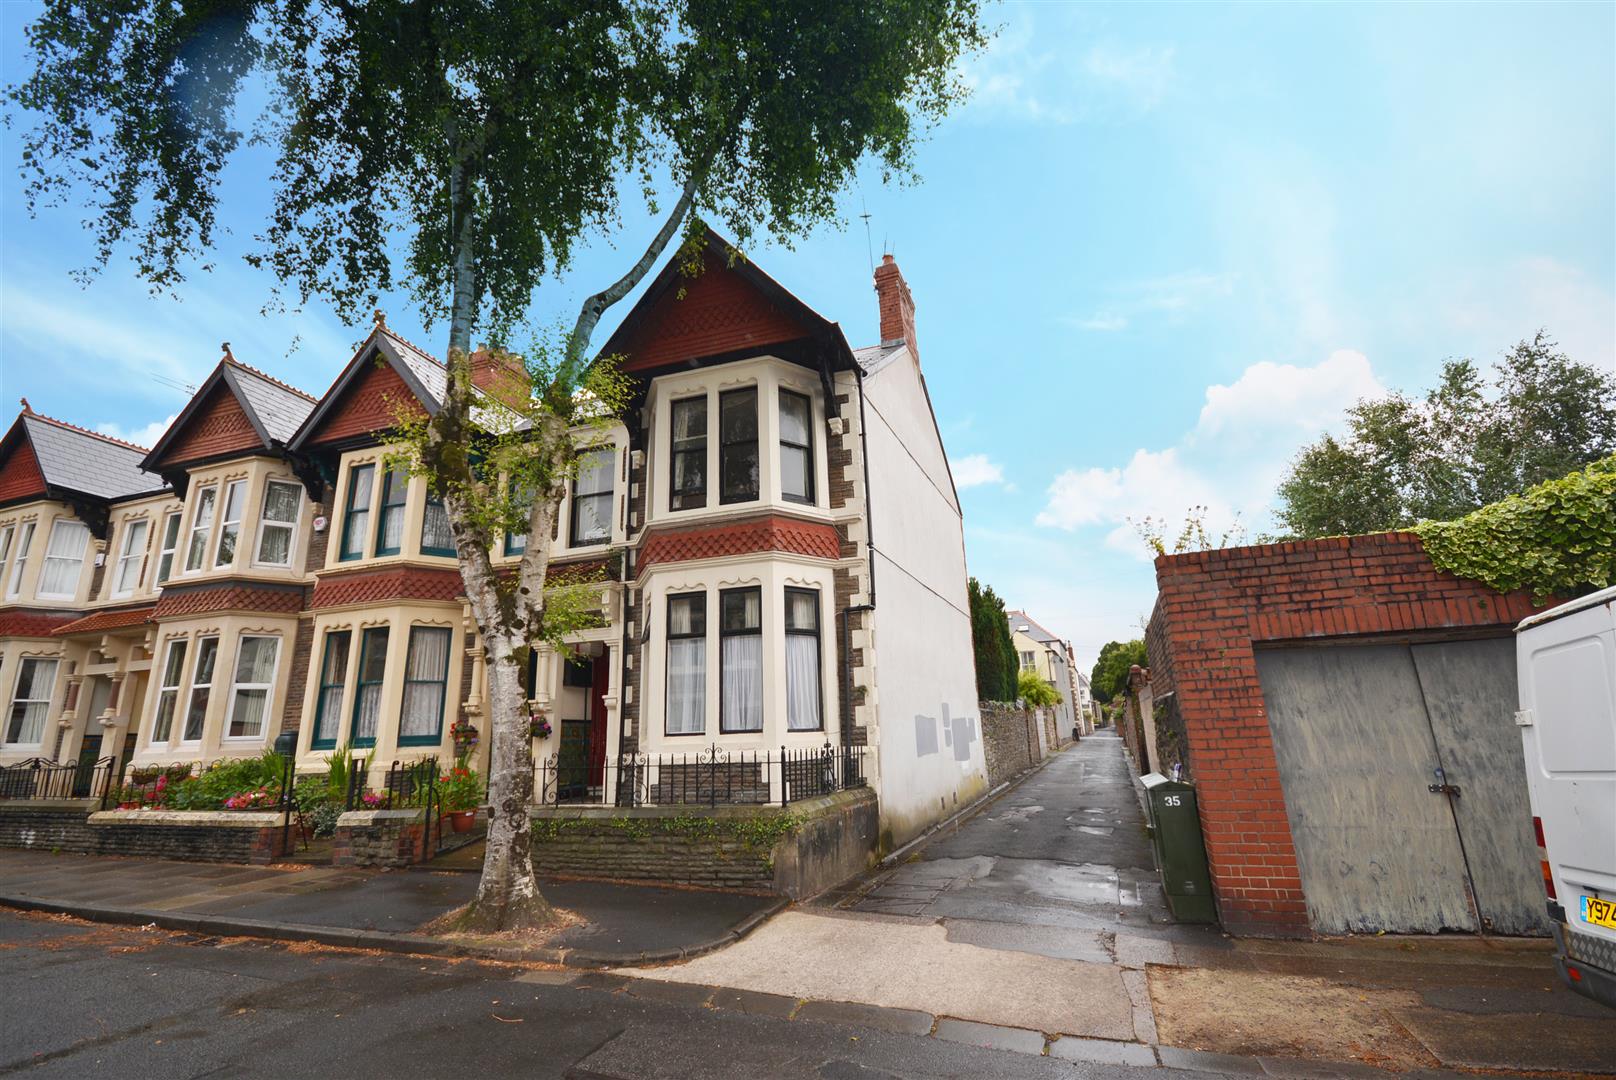 2 bed apartment to rent in Kelvin Road, Cardiff - Property Image 1